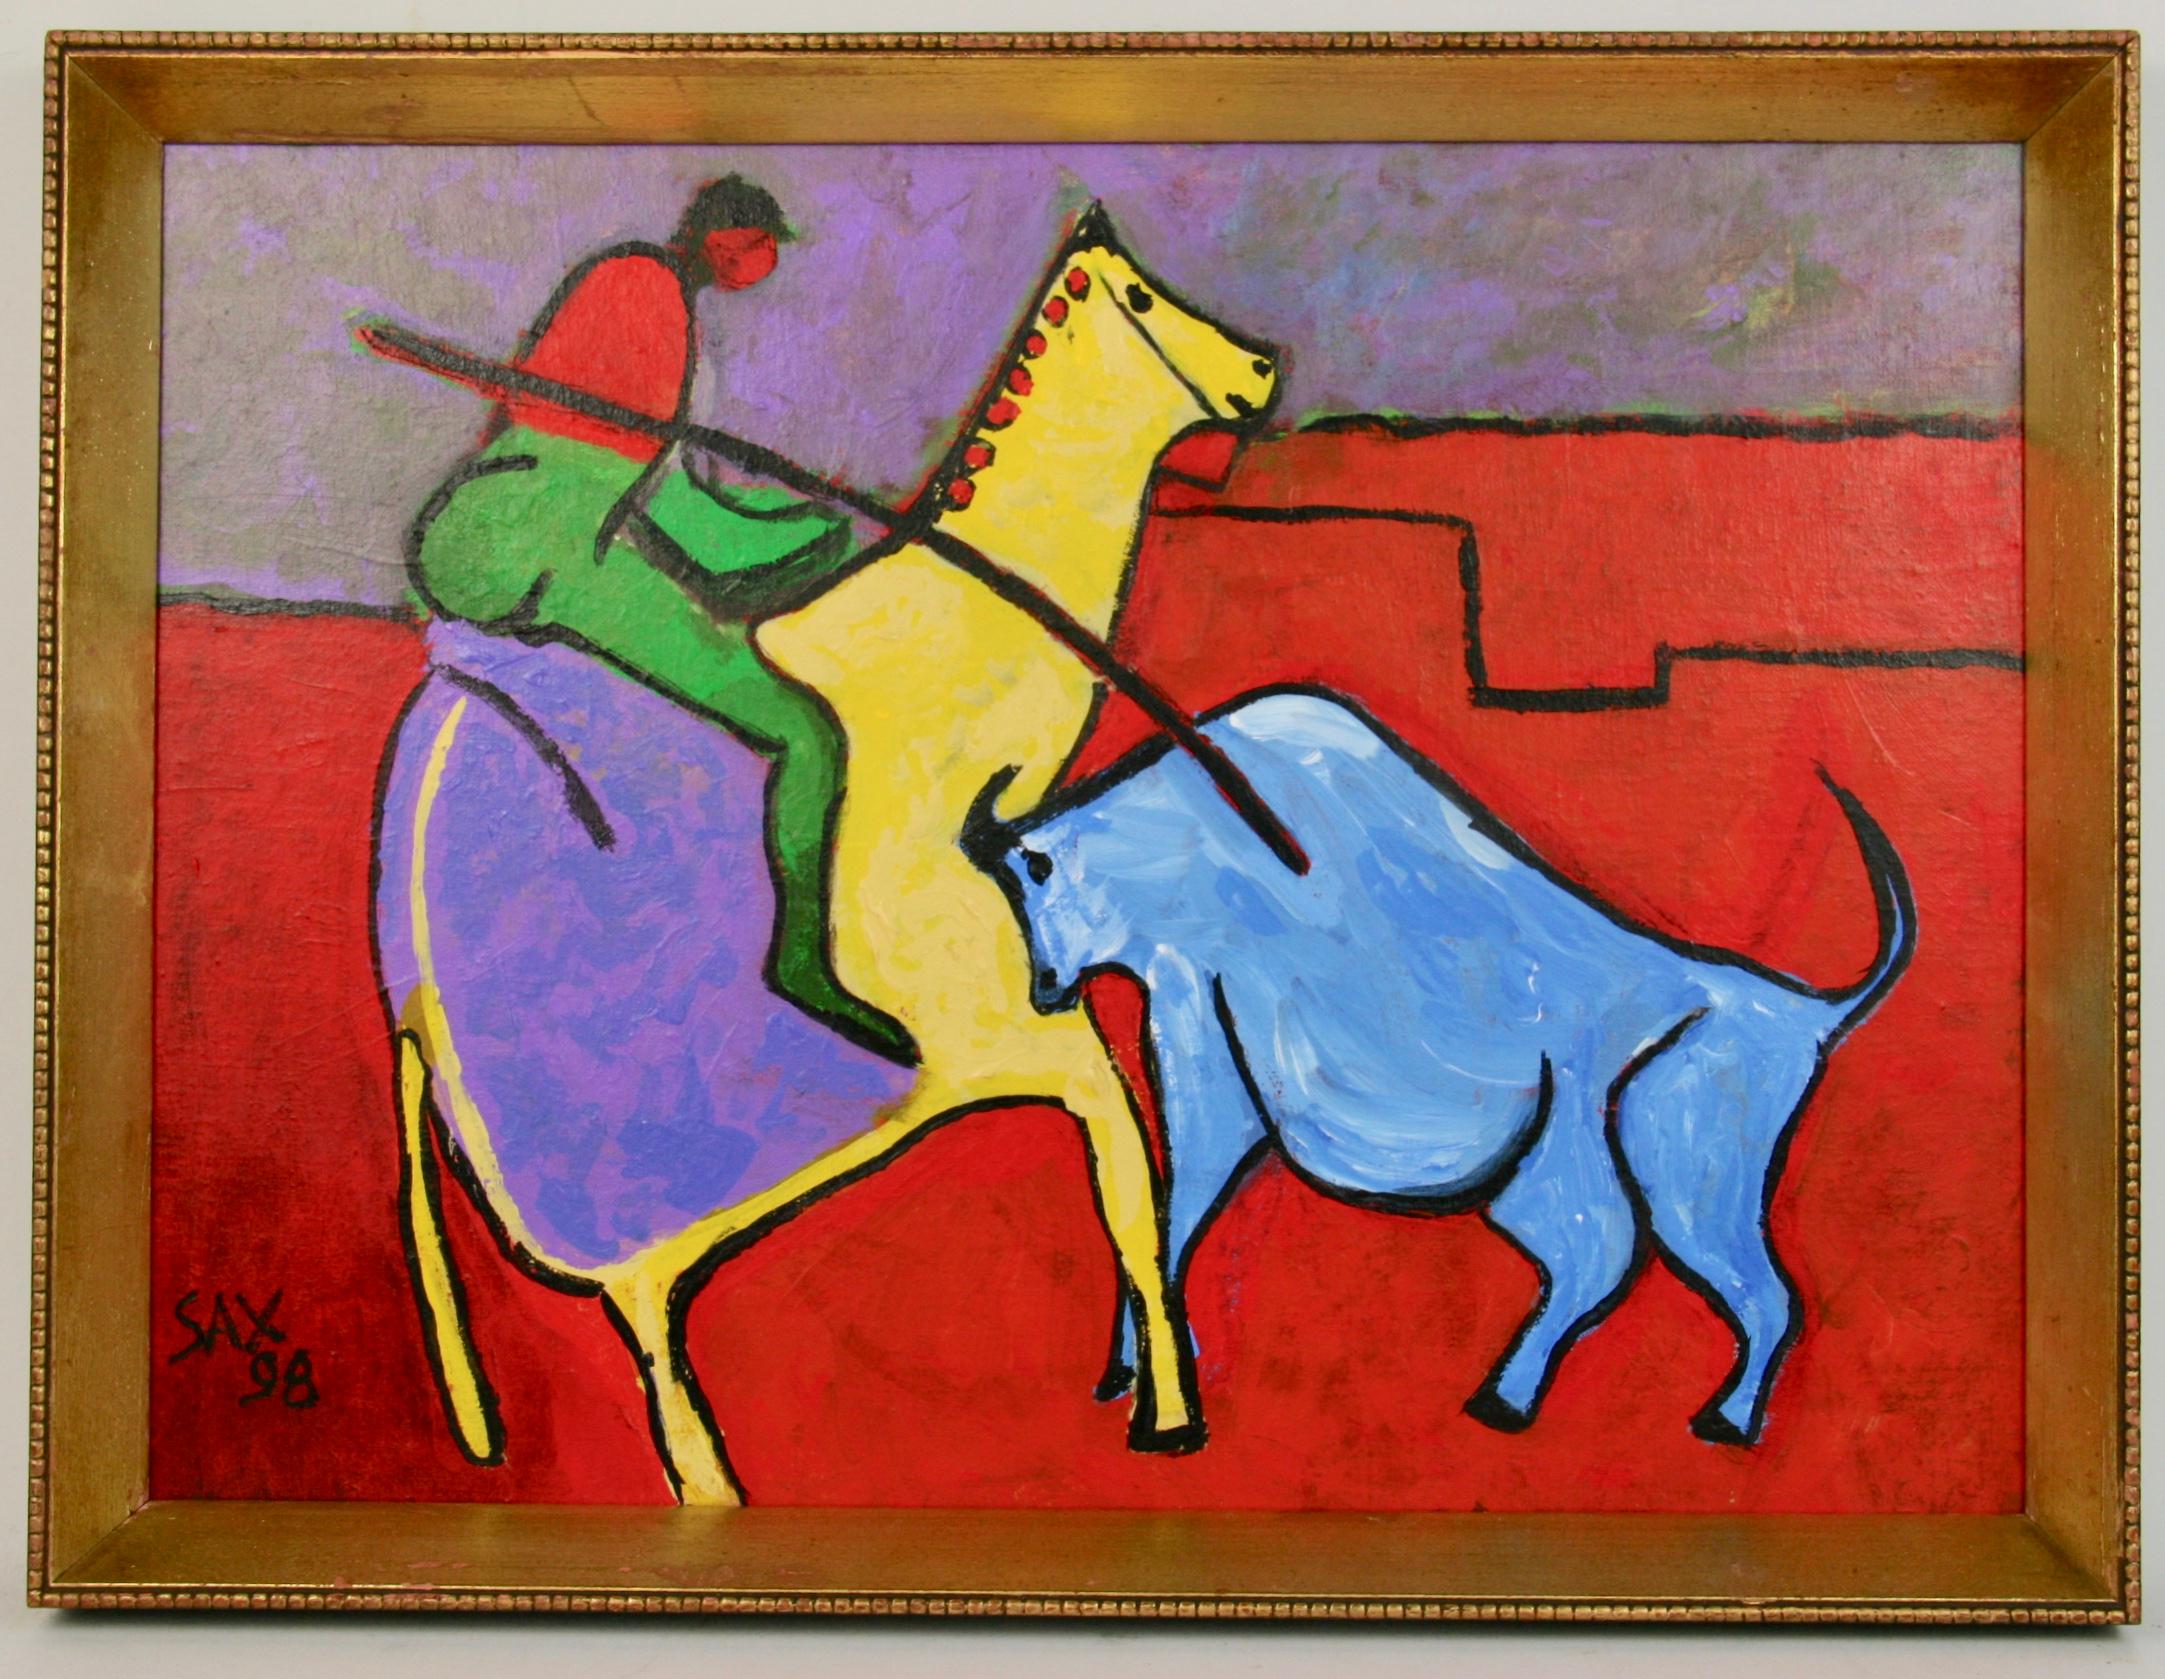 Sax Abstract Painting - Fauvist Abstract Bull Fight